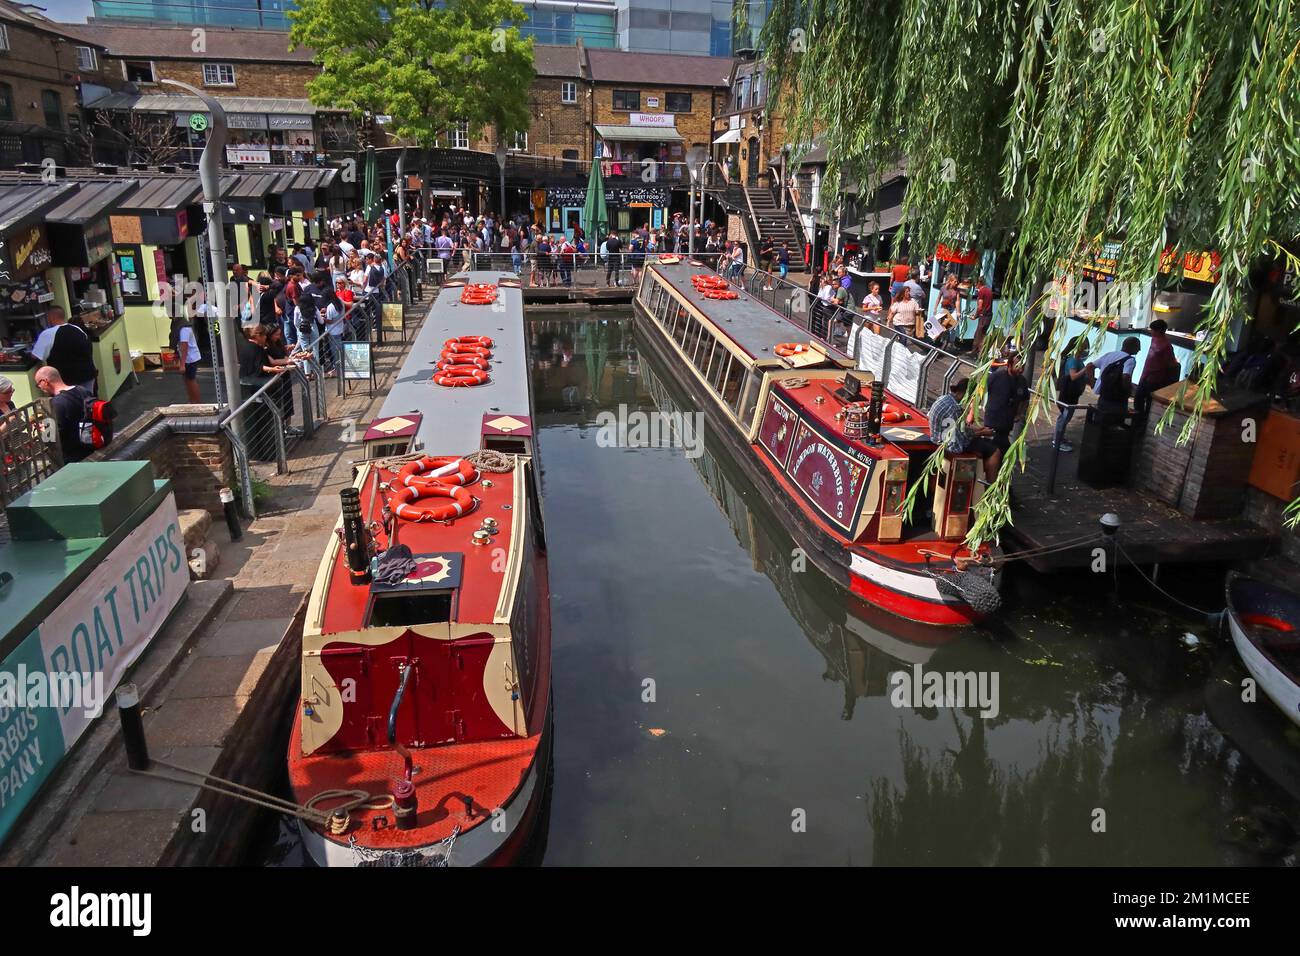 Boat trips at Camden Locks, canal, boats and market, Lock Place, Camden, London, England, UK, NW1 8AF Stock Photo